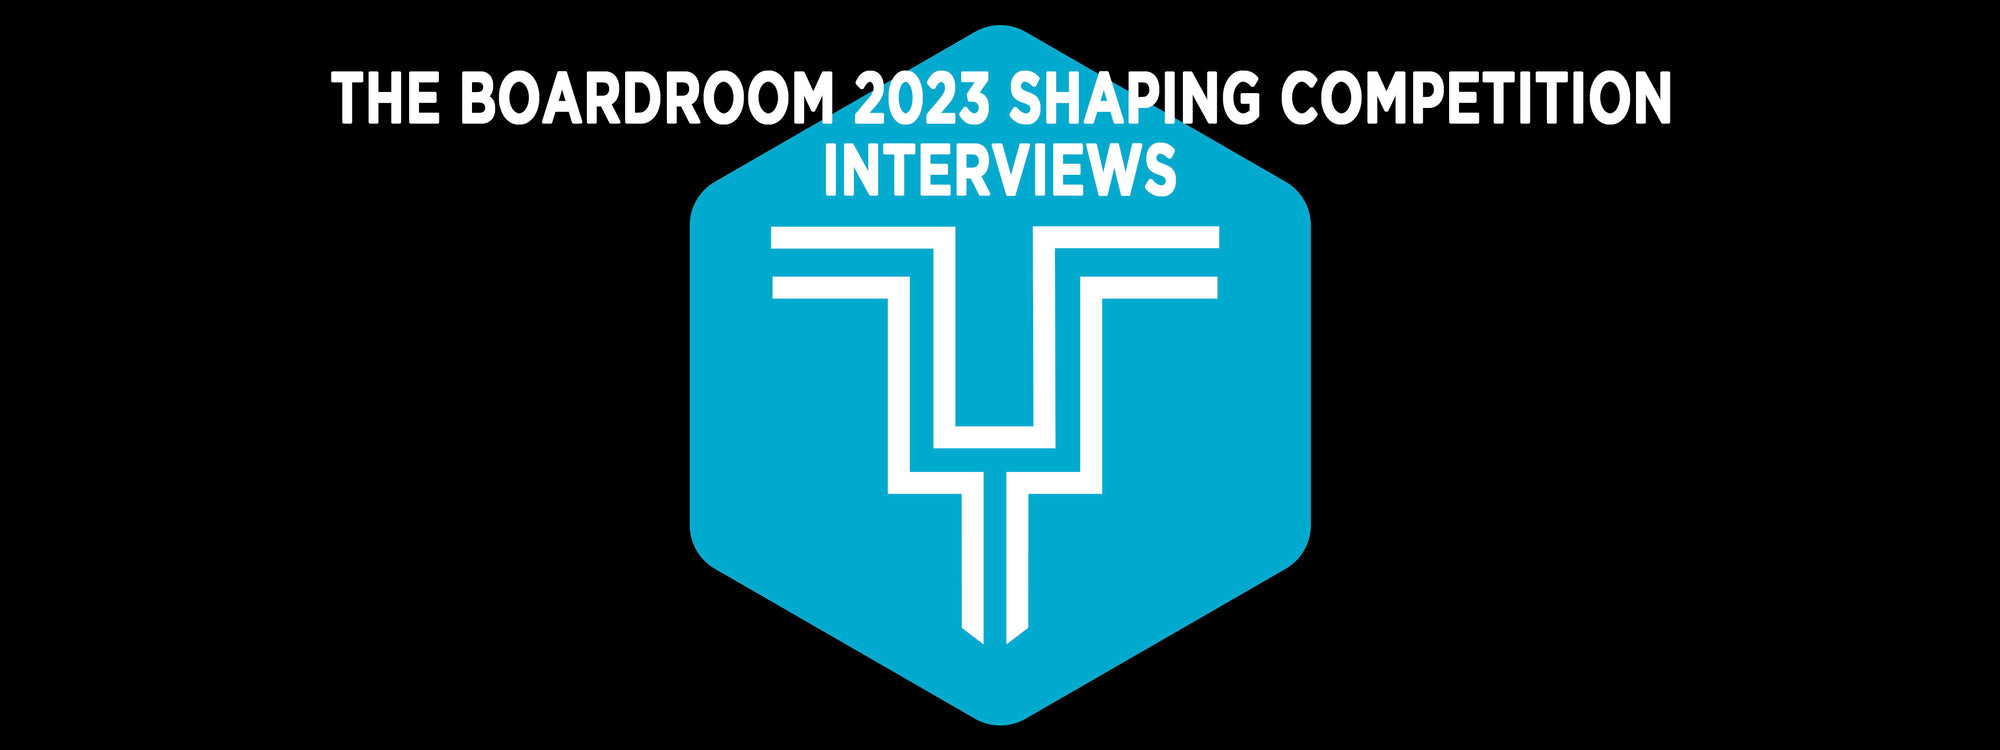 THE BOARDROOM 2023 COMPETITOR INTERVIEWS